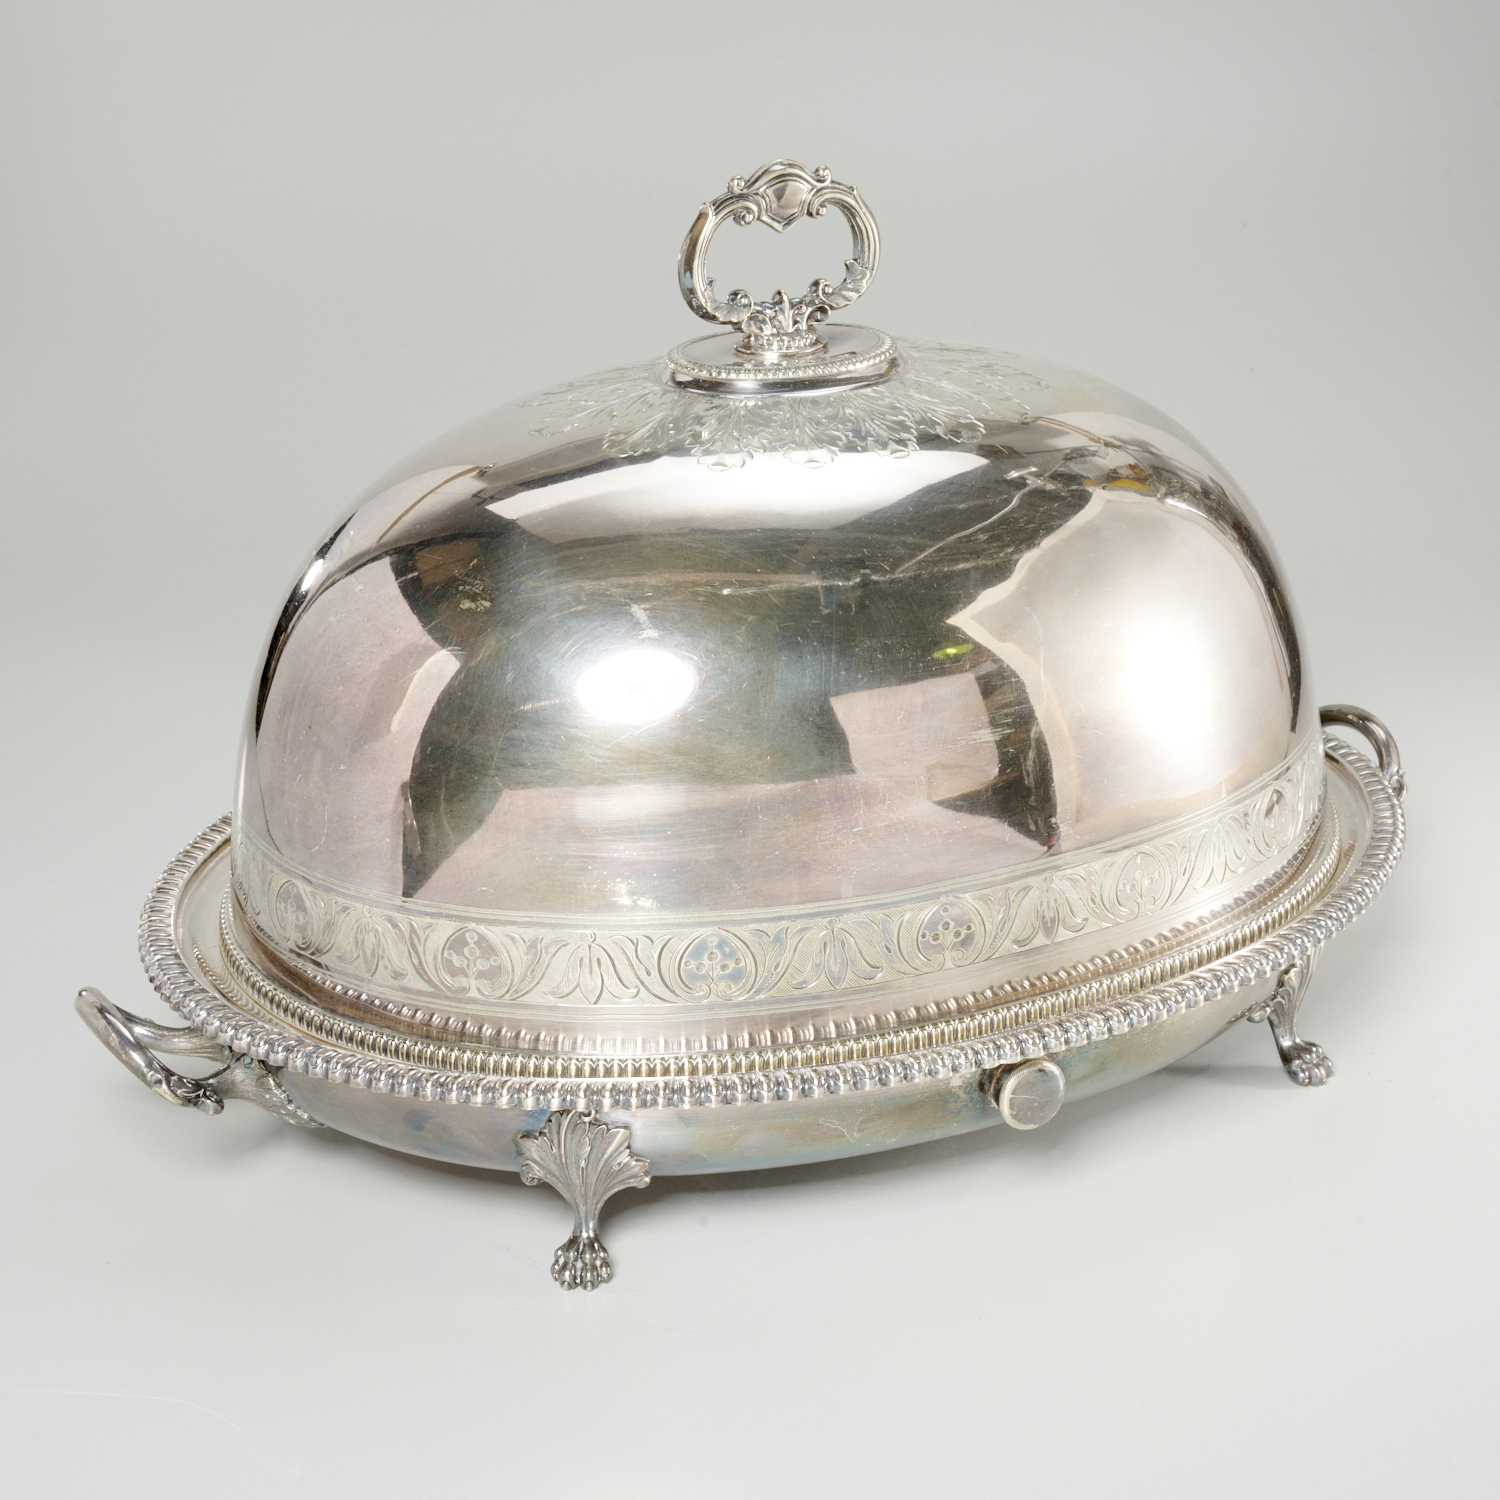 LARGE SHEFFIELD PLATED MEAT DOME AND